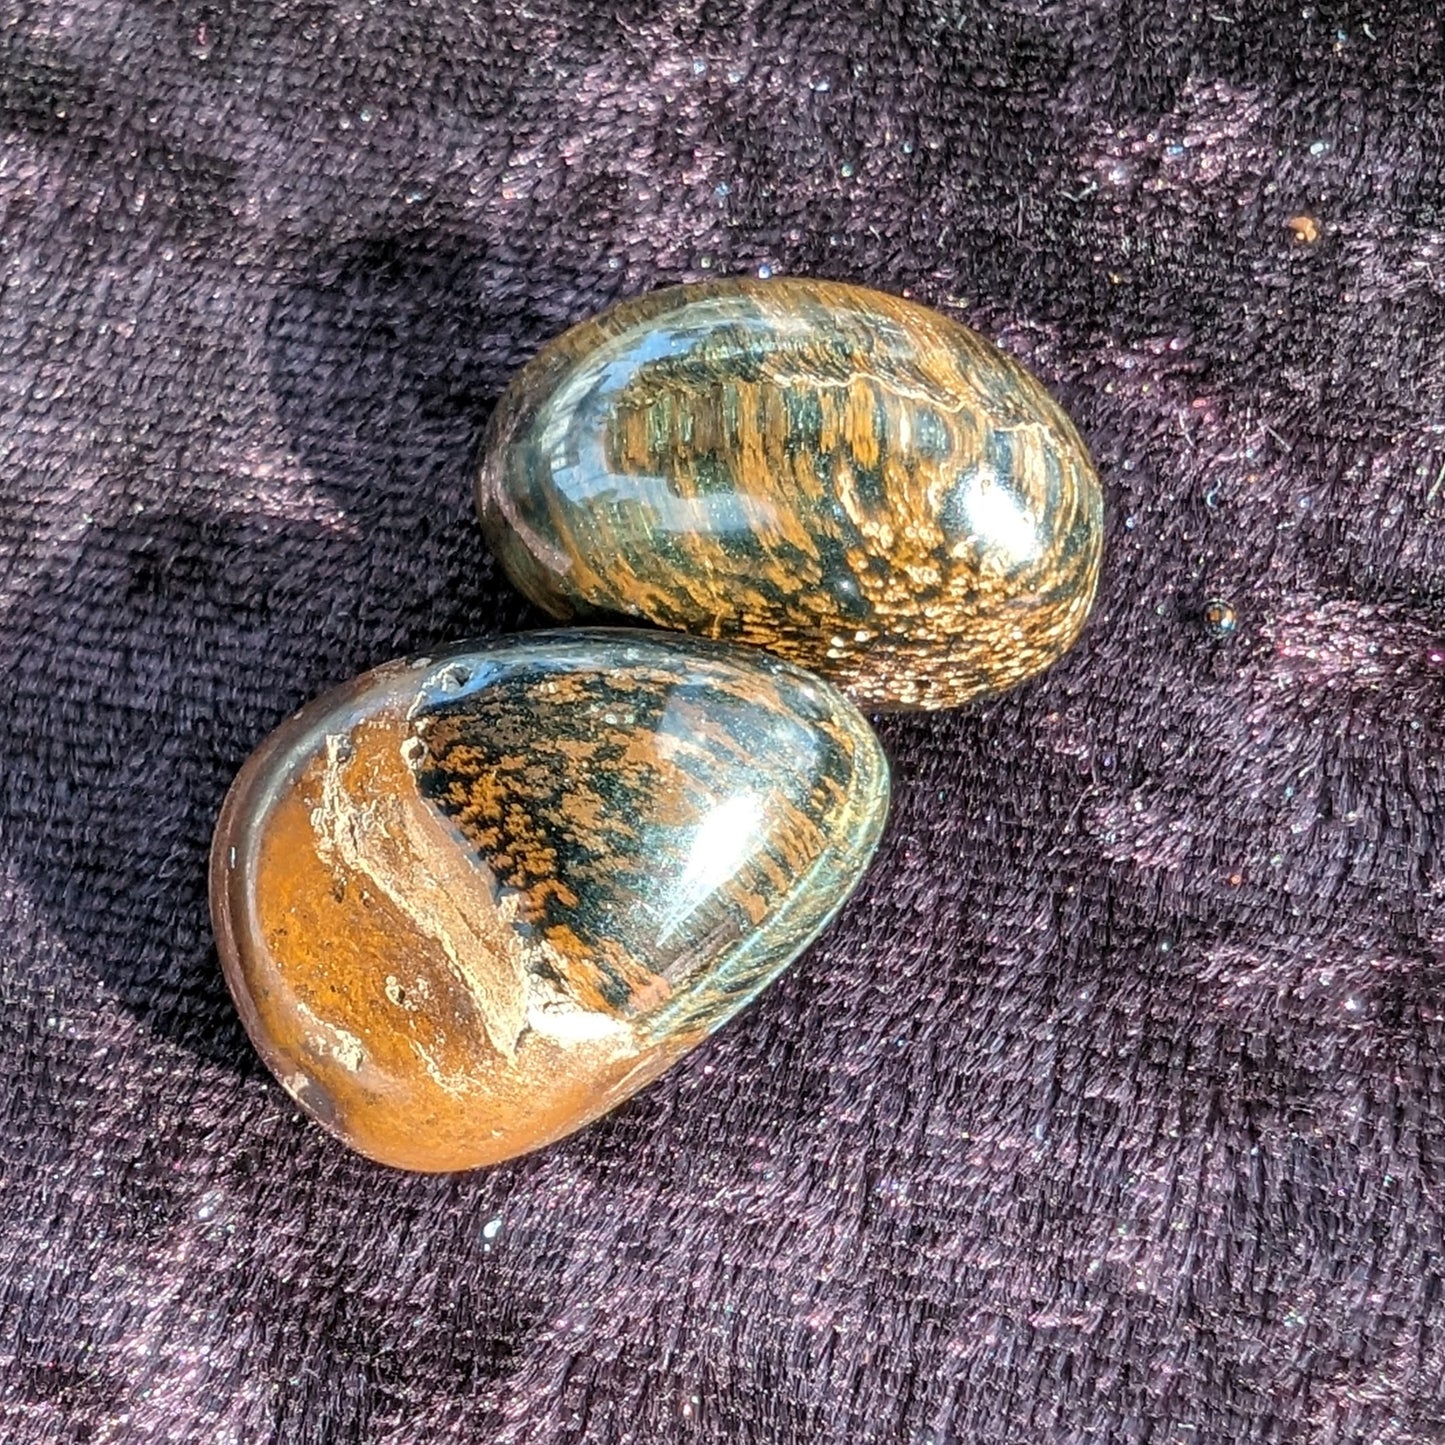 Blue Red and Golden Tigers Eye 2 small polished stones 15g